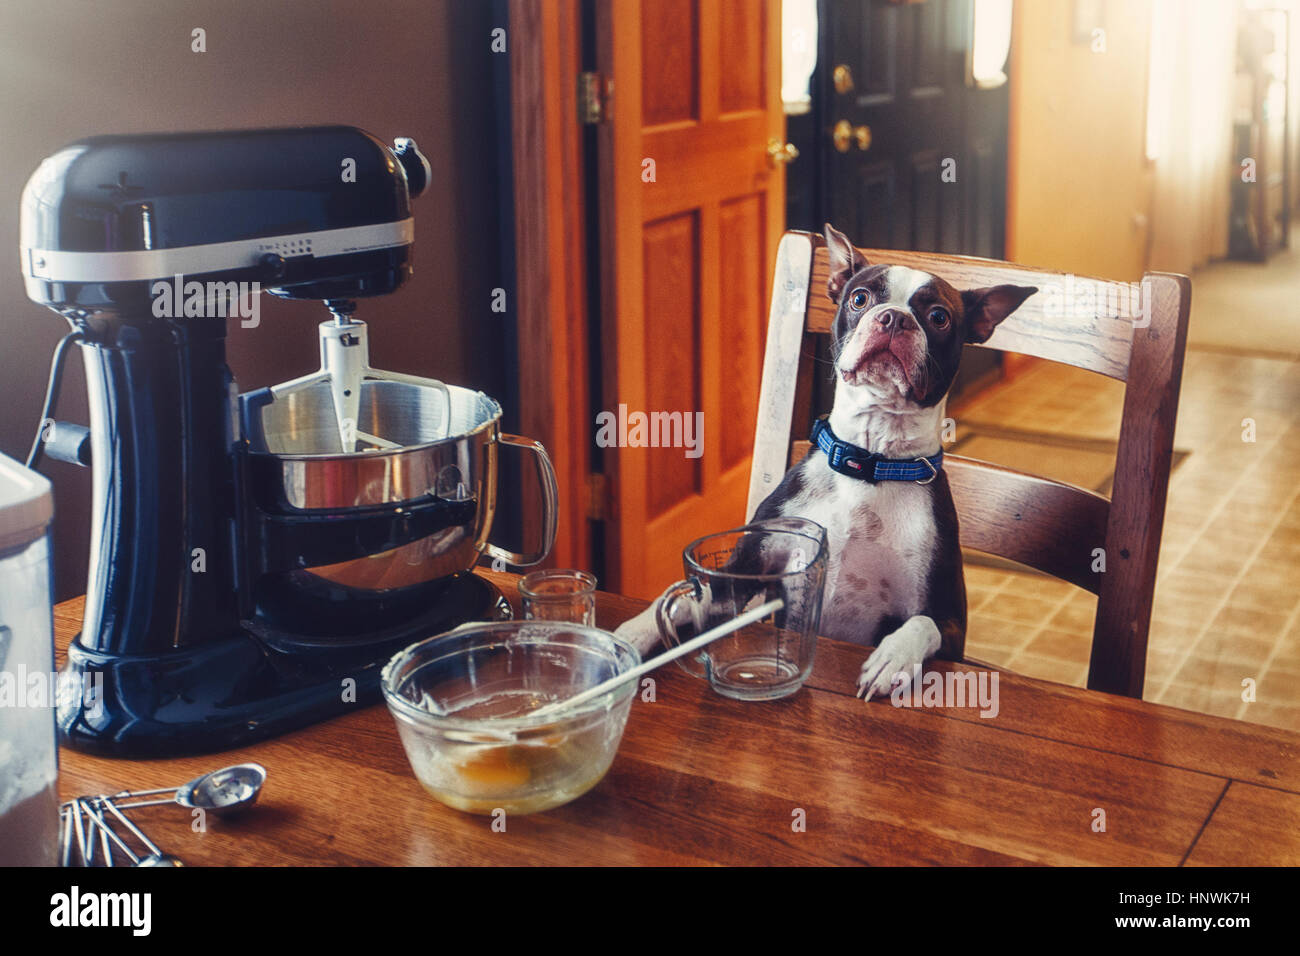 Dog sitting at table, food mixer and baking equipment on table Stock Photo